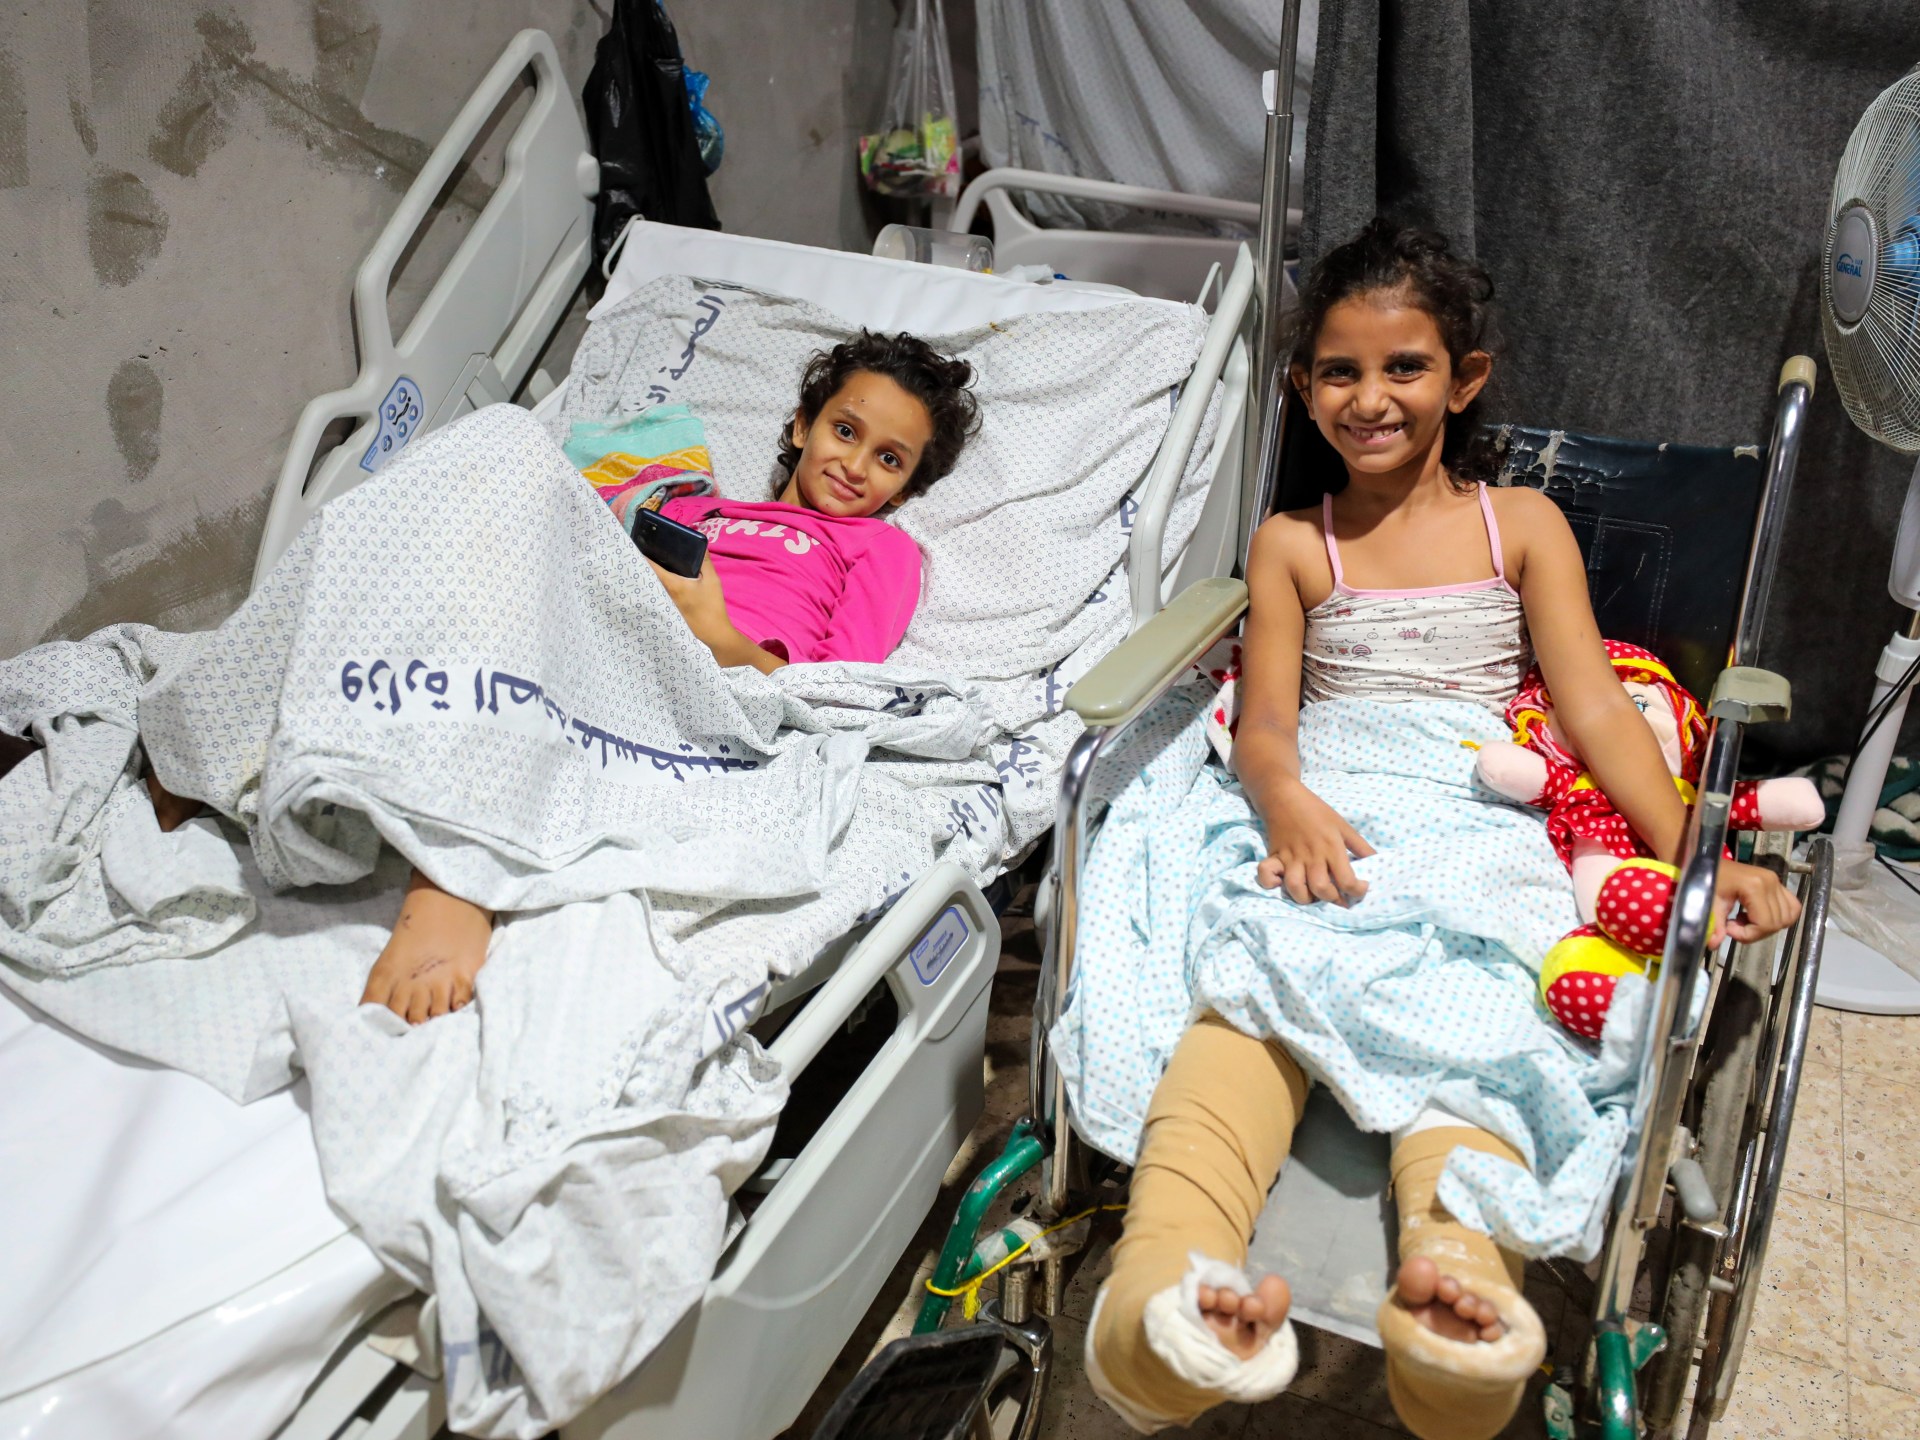 ‘War is stupid and I want it to end’: Injured Palestinian children speak | Israel-Palestine conflict News